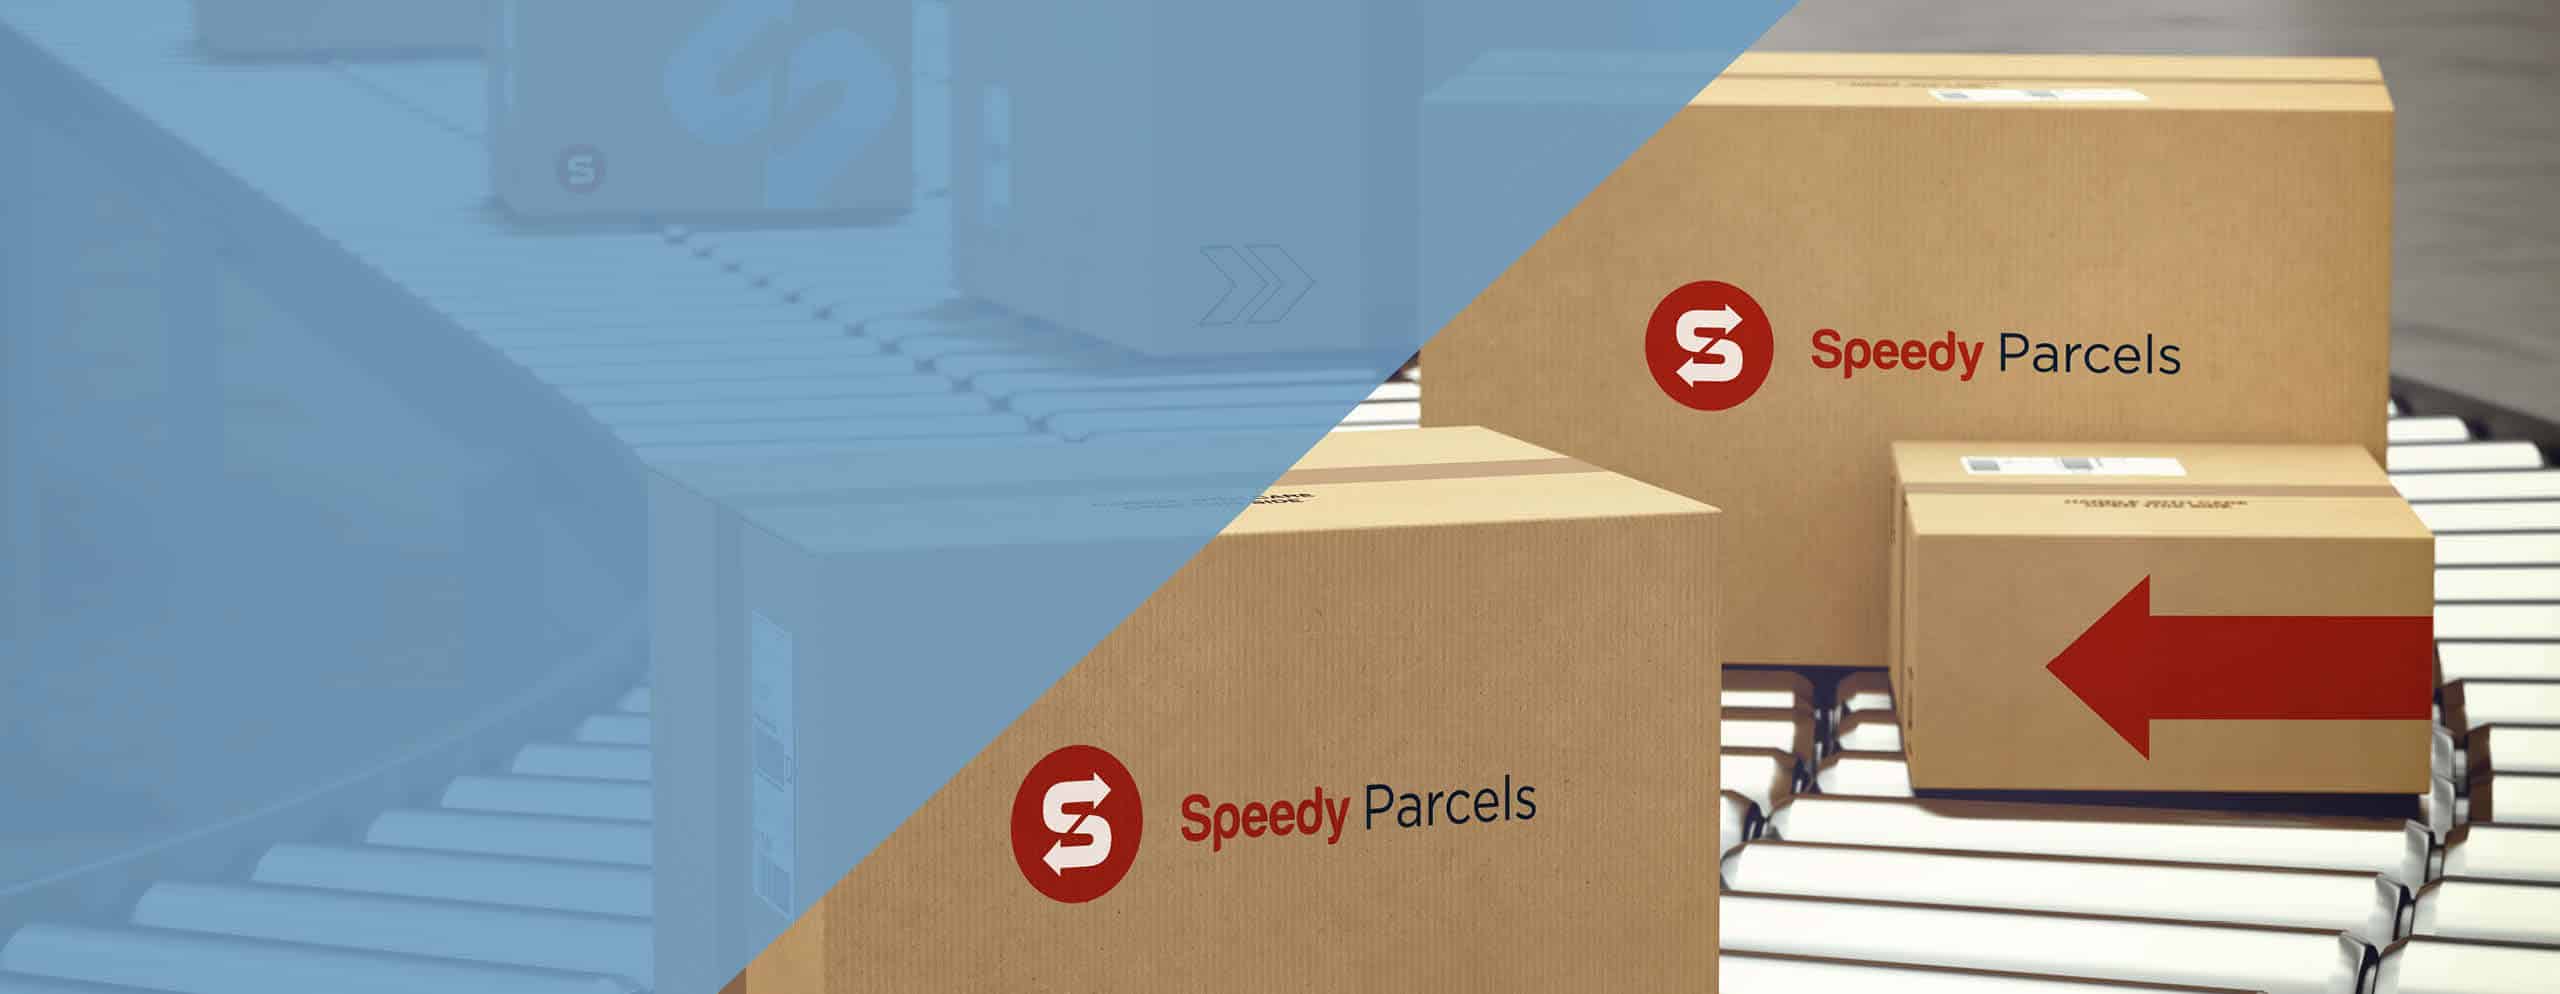 Introducing Speedy Parcels: Speedy Freight’s New Parcel Delivery Service